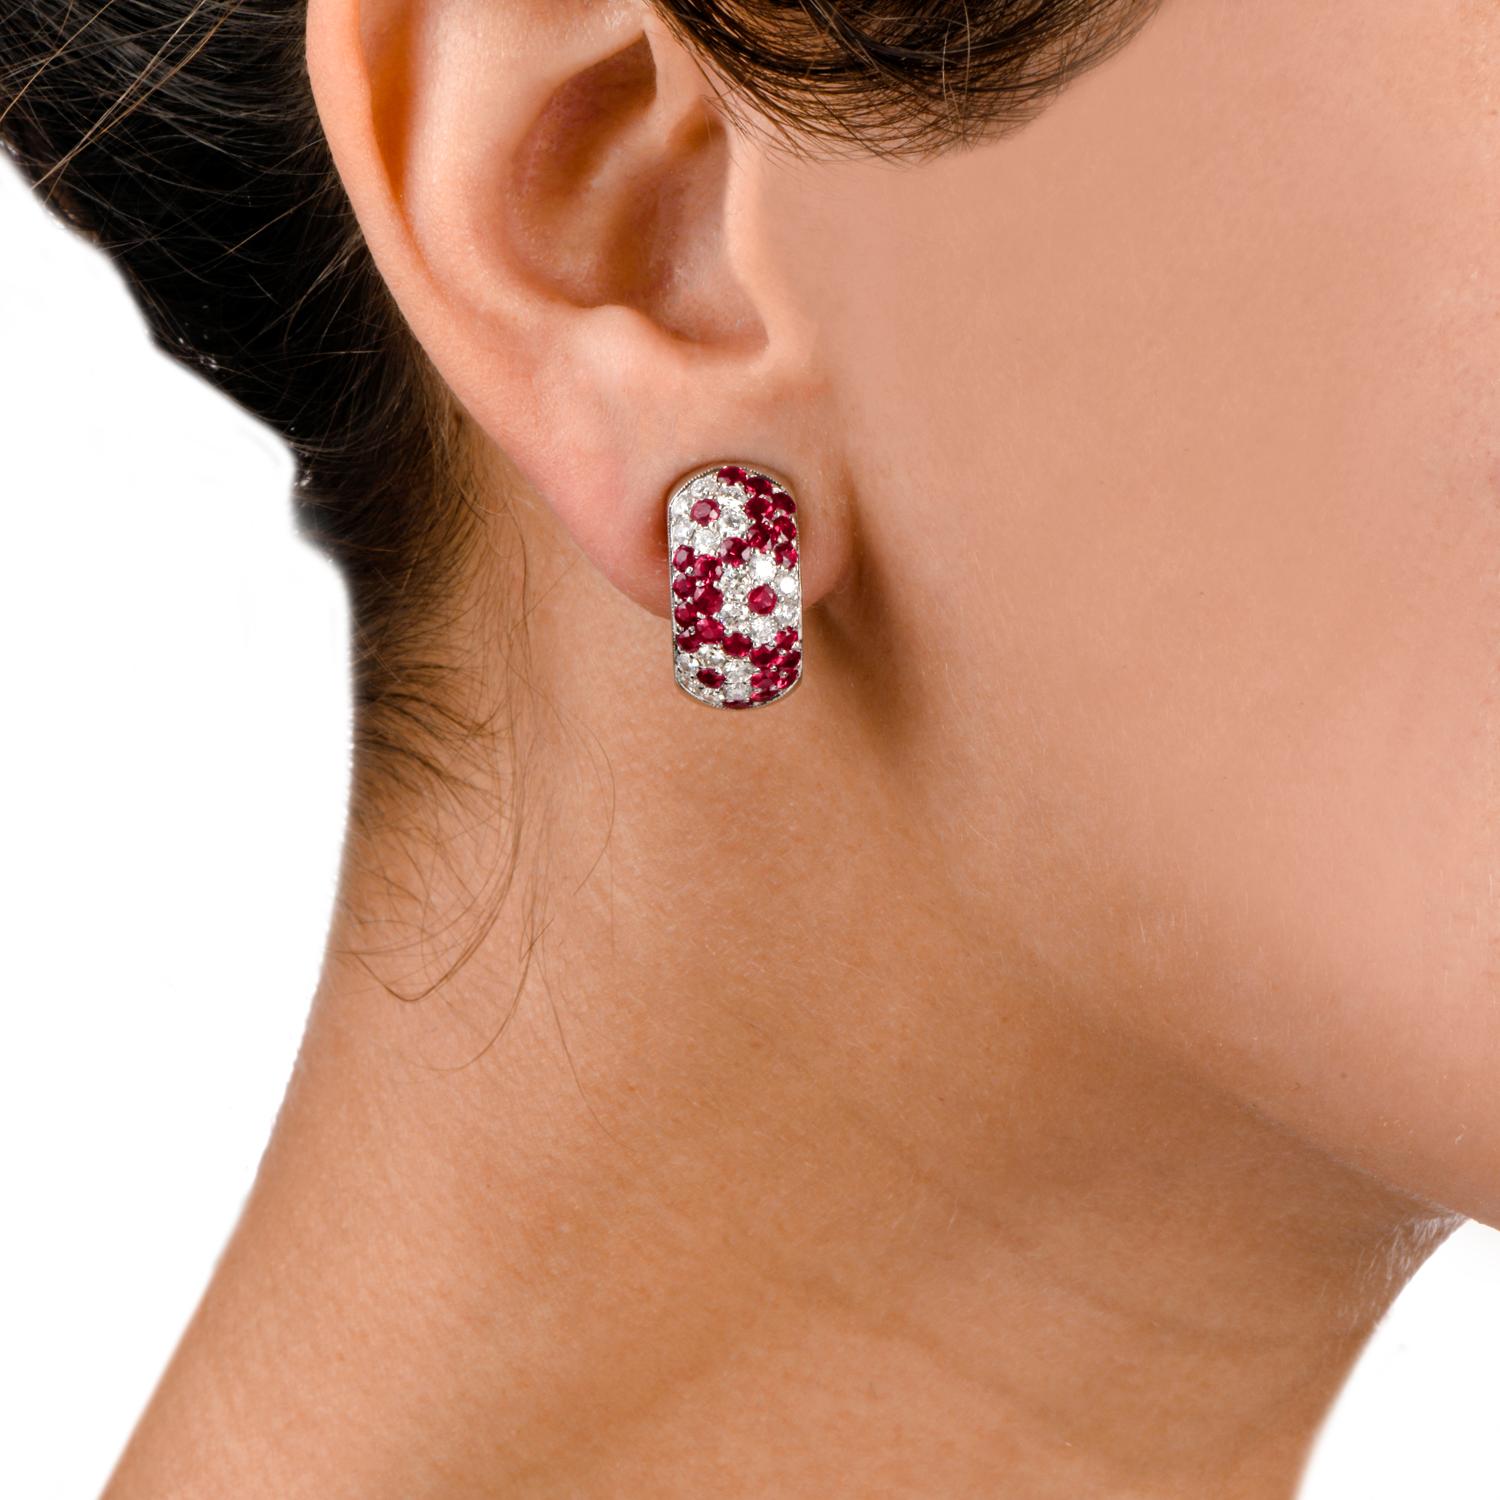 These Diamond and Ruby hoop earrings were inspired with a wide band pave flower motif and crafted in 18k gold weighing approximately 16.0 grams. The style in adorned with Ruby and Diamond flowered patterns and measure approximately 10.13mm x 19.73mm